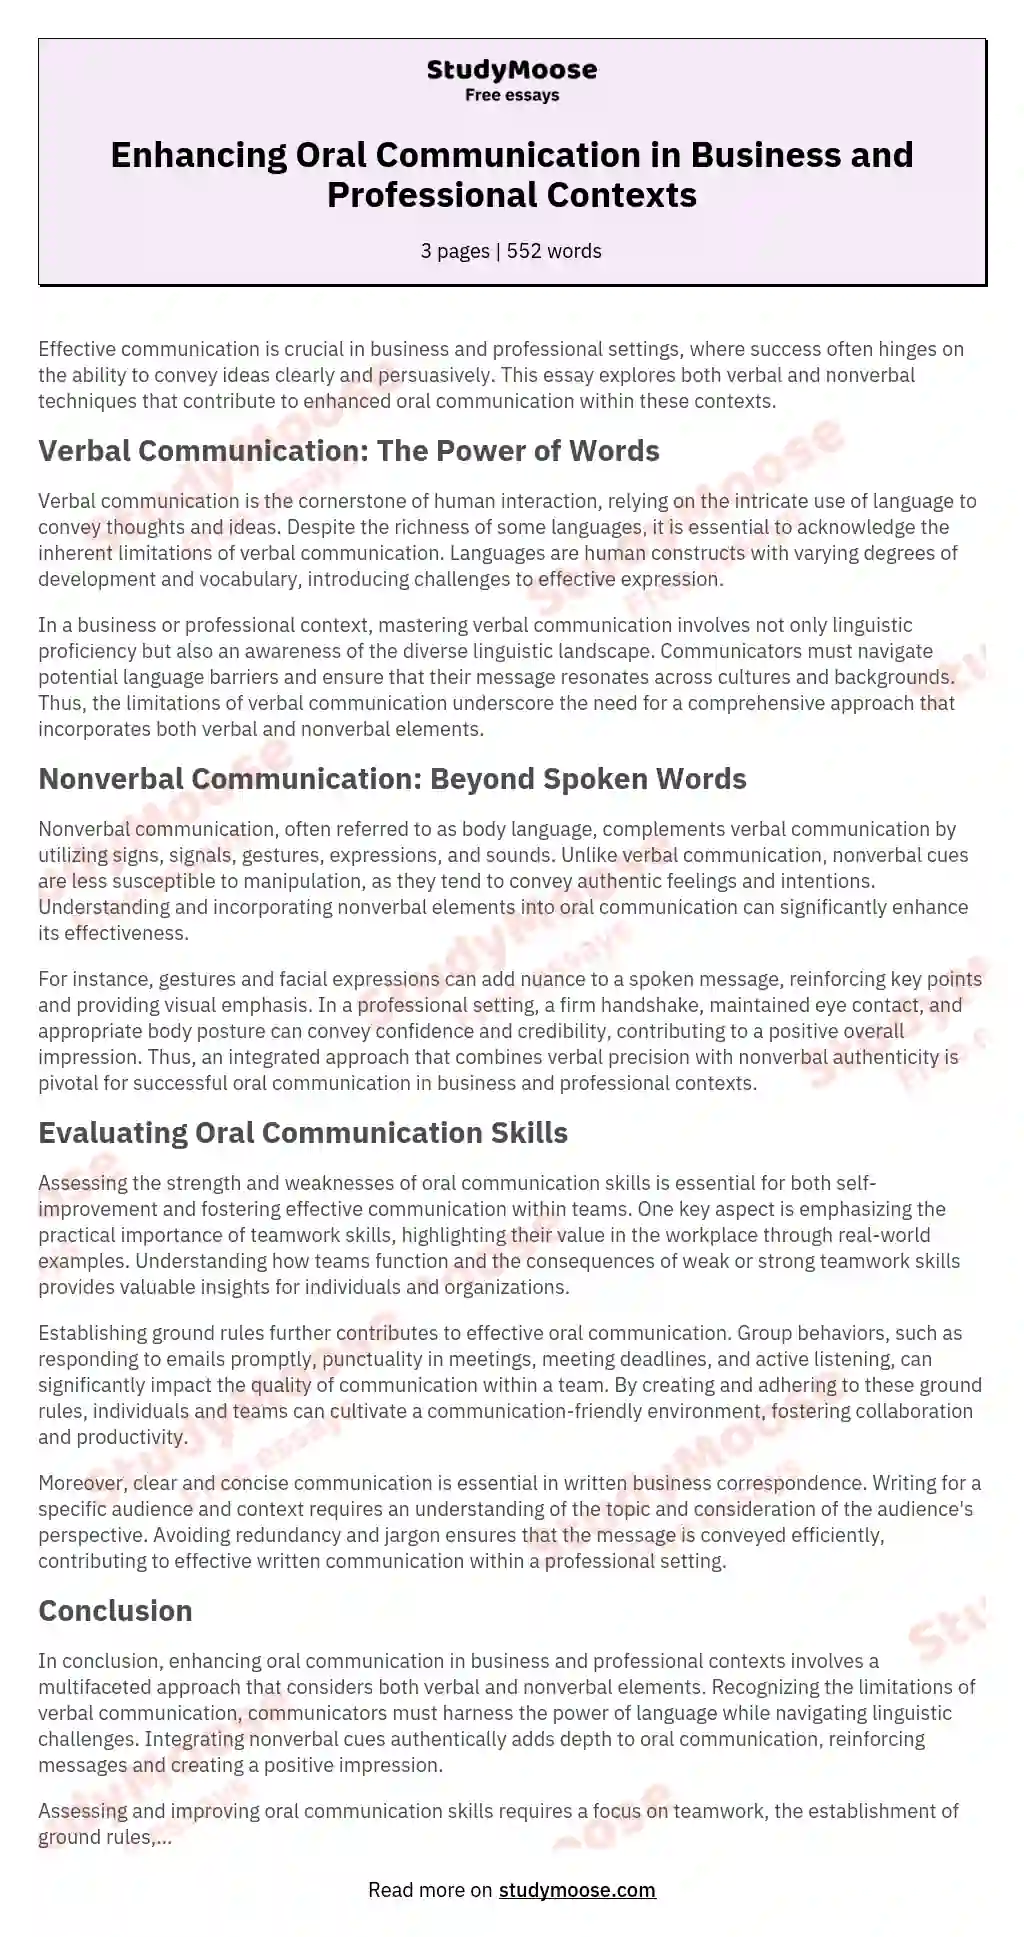 Enhancing Oral Communication in Business and Professional Contexts essay